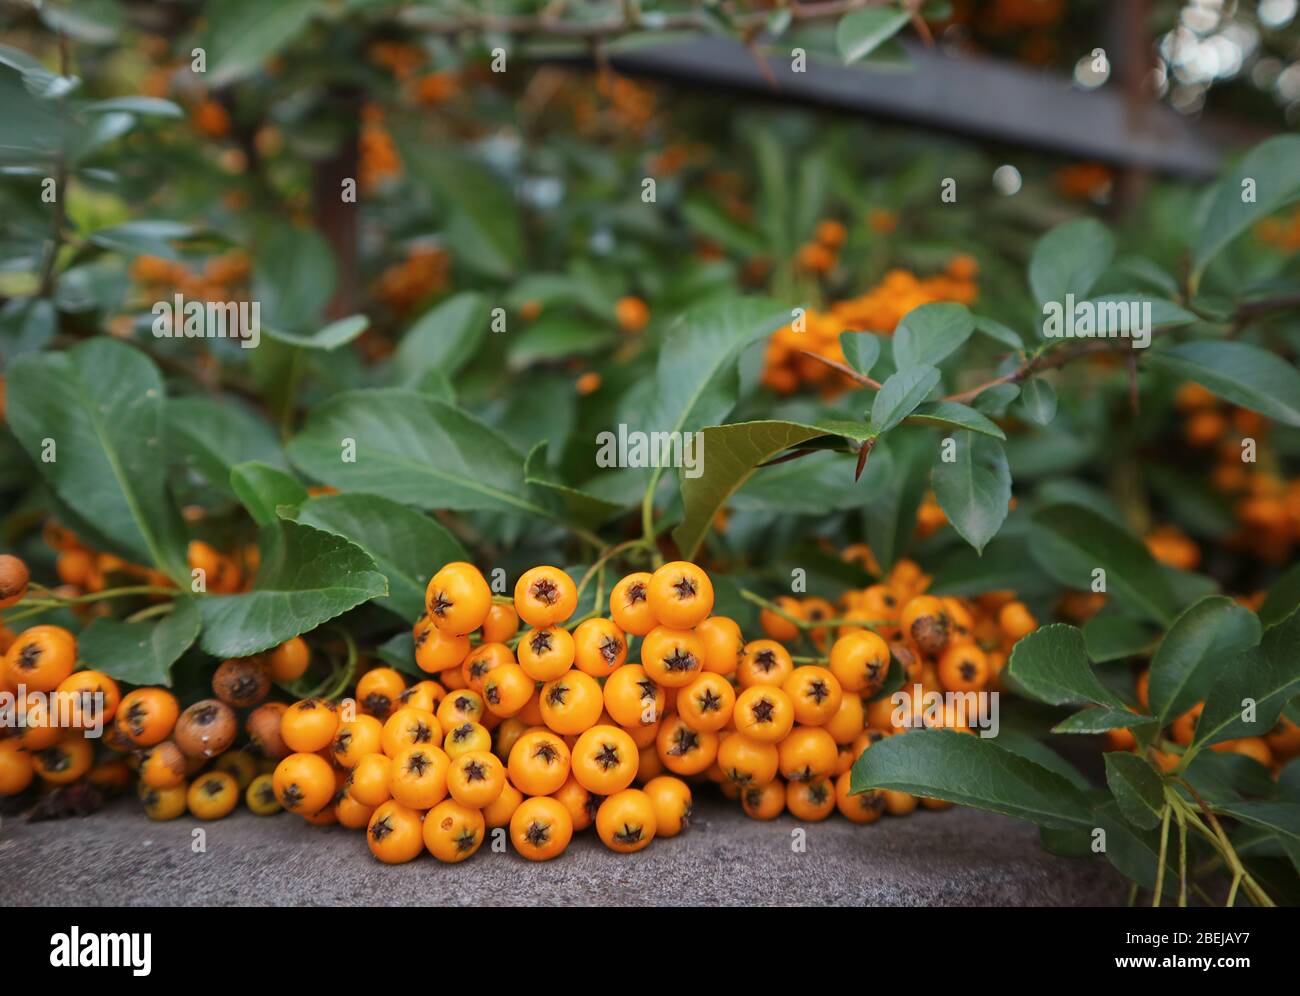 Closeup Ripe Berries of the Orange Firethorn or Pyracantha Plants on the Fence Stock Photo